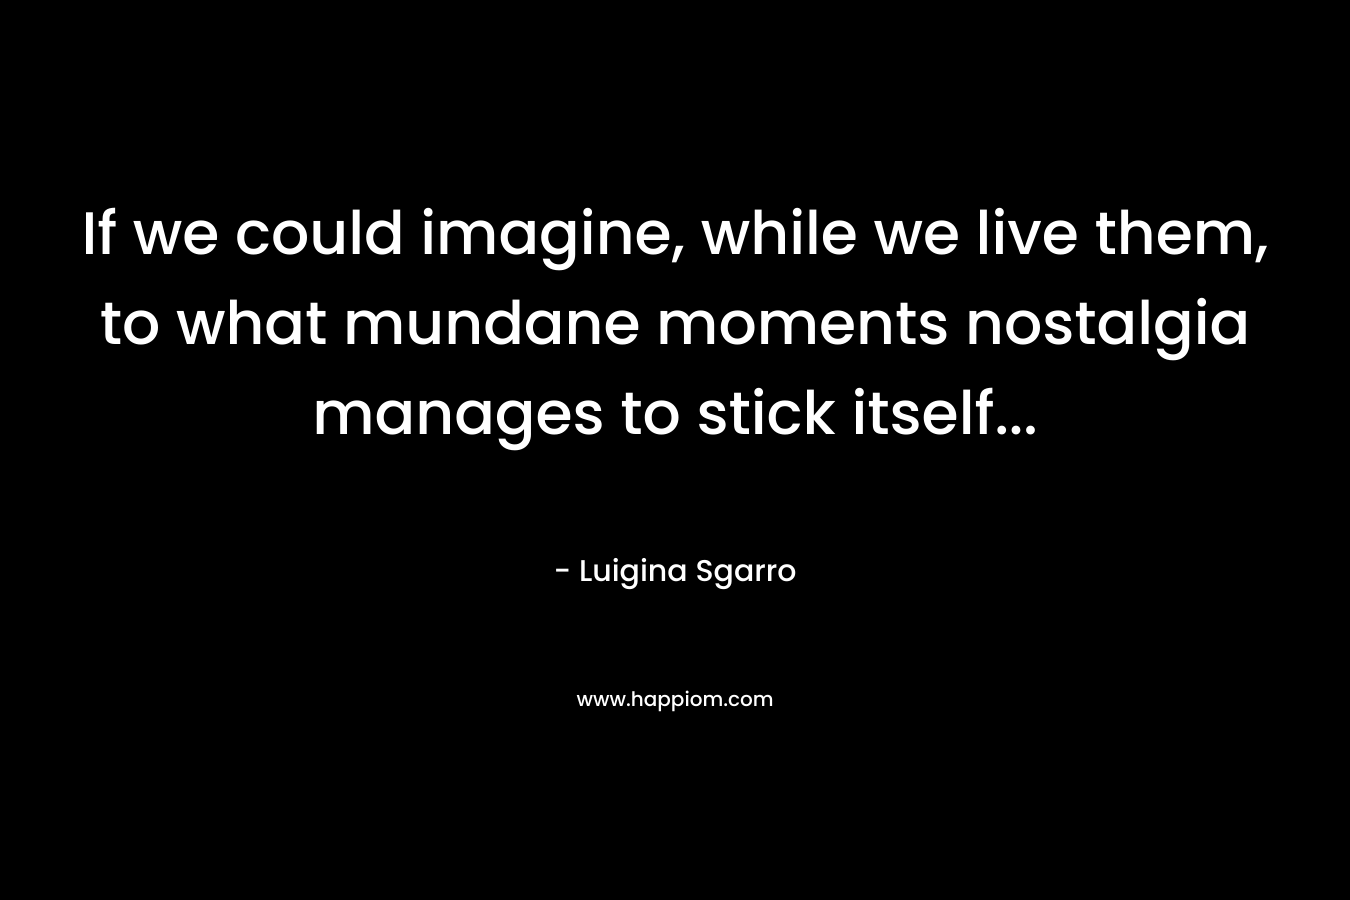 If we could imagine, while we live them, to what mundane moments nostalgia manages to stick itself...